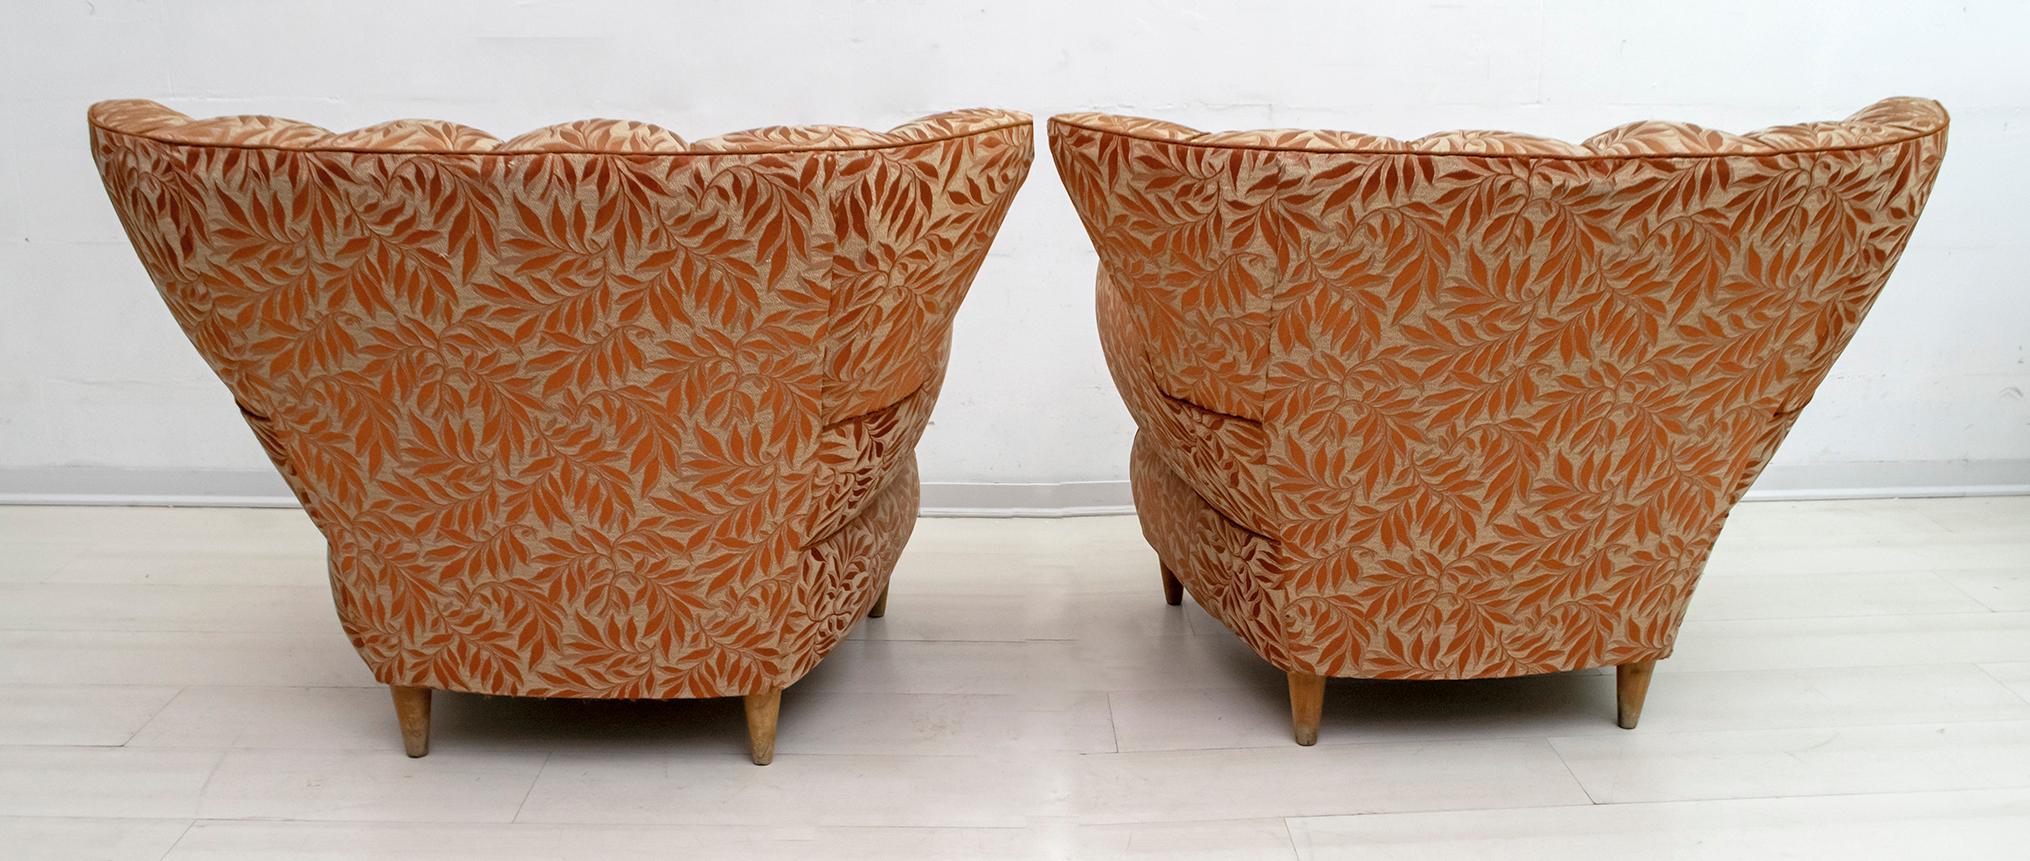 Fabric Gugliemo Ulrich Art Deco Italian Sofa and Two Armchairs, 1940s For Sale